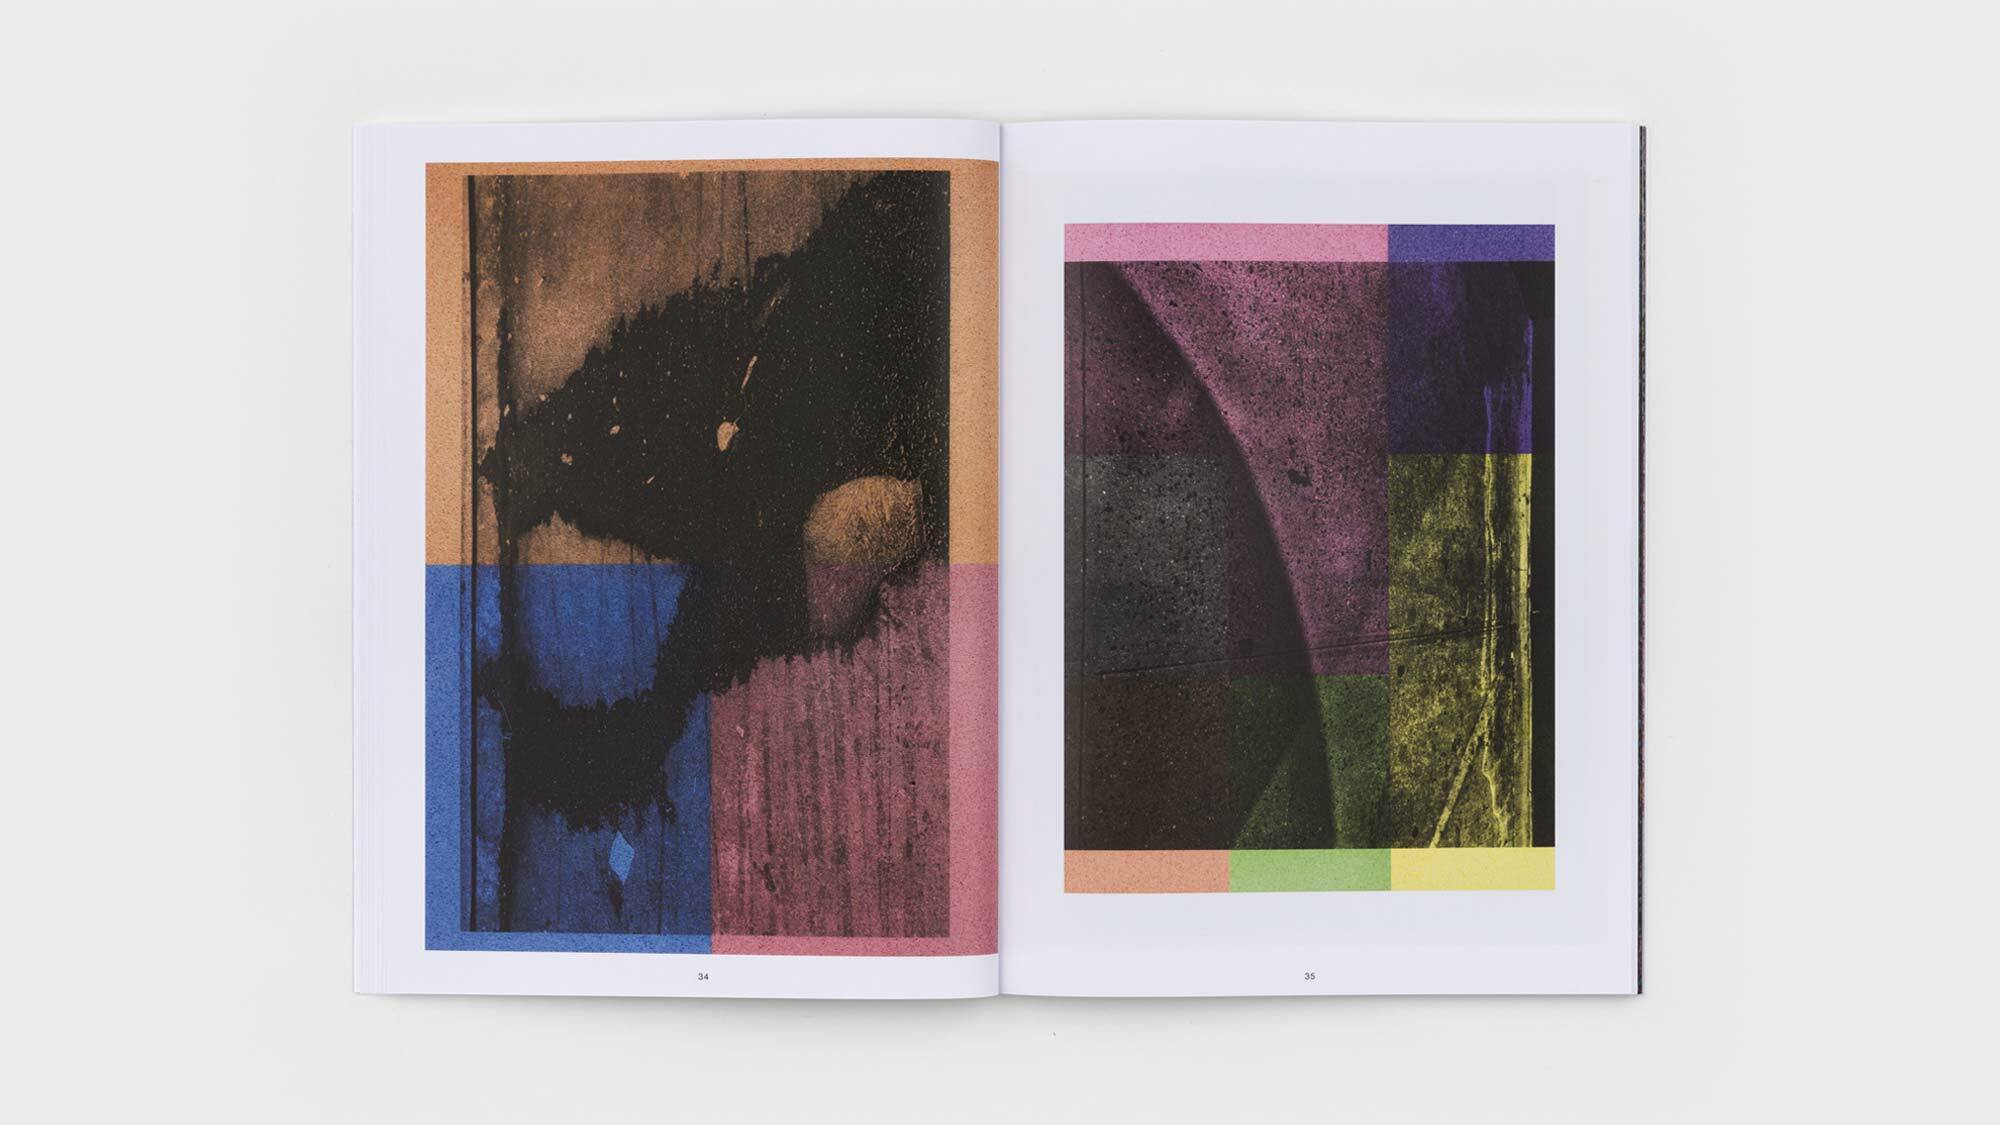 Pages 34 and 35, each adorned with an image of a four-color sponge-painting.